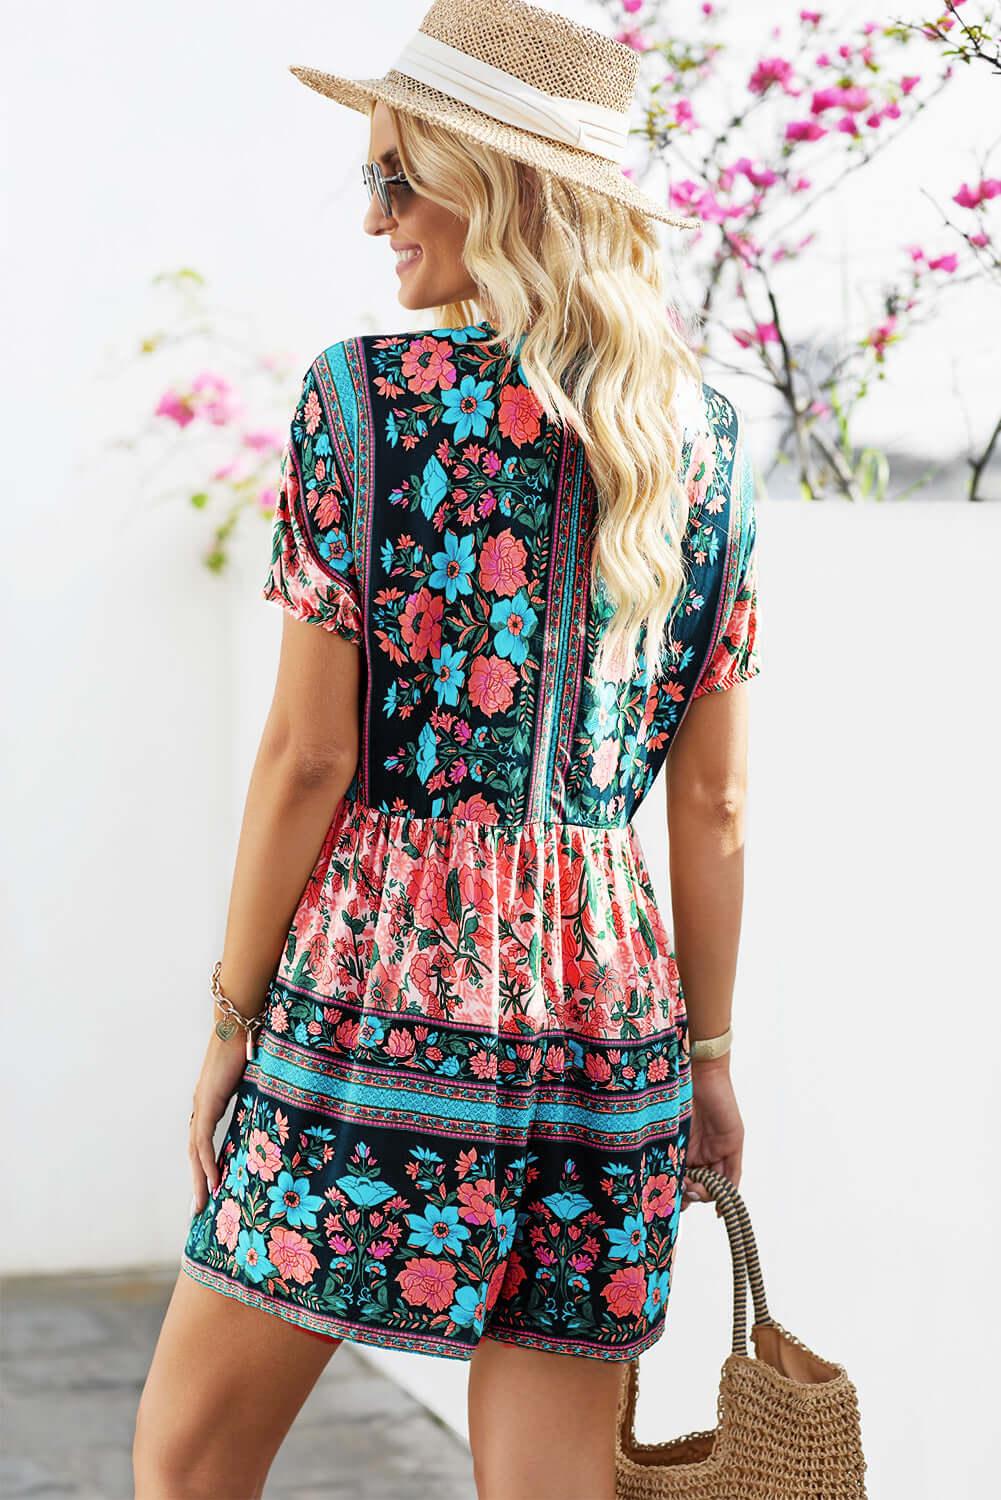 Boho Romper Womens - a romper with button front detail and tie neck. #Firefly Lane Boutique1